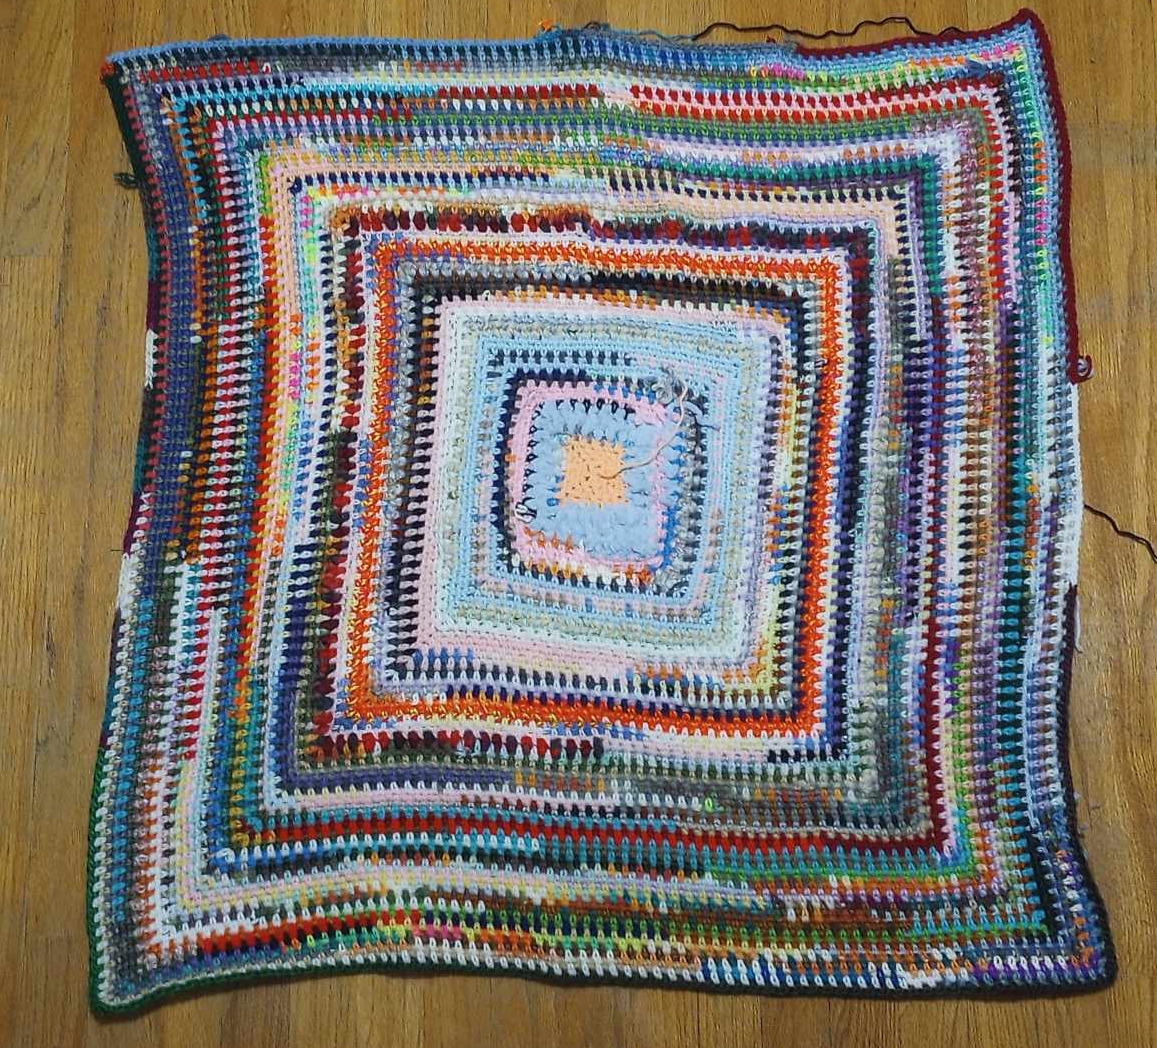 Square, moss stitch scrap yarn blanket, about 3 feet wide.